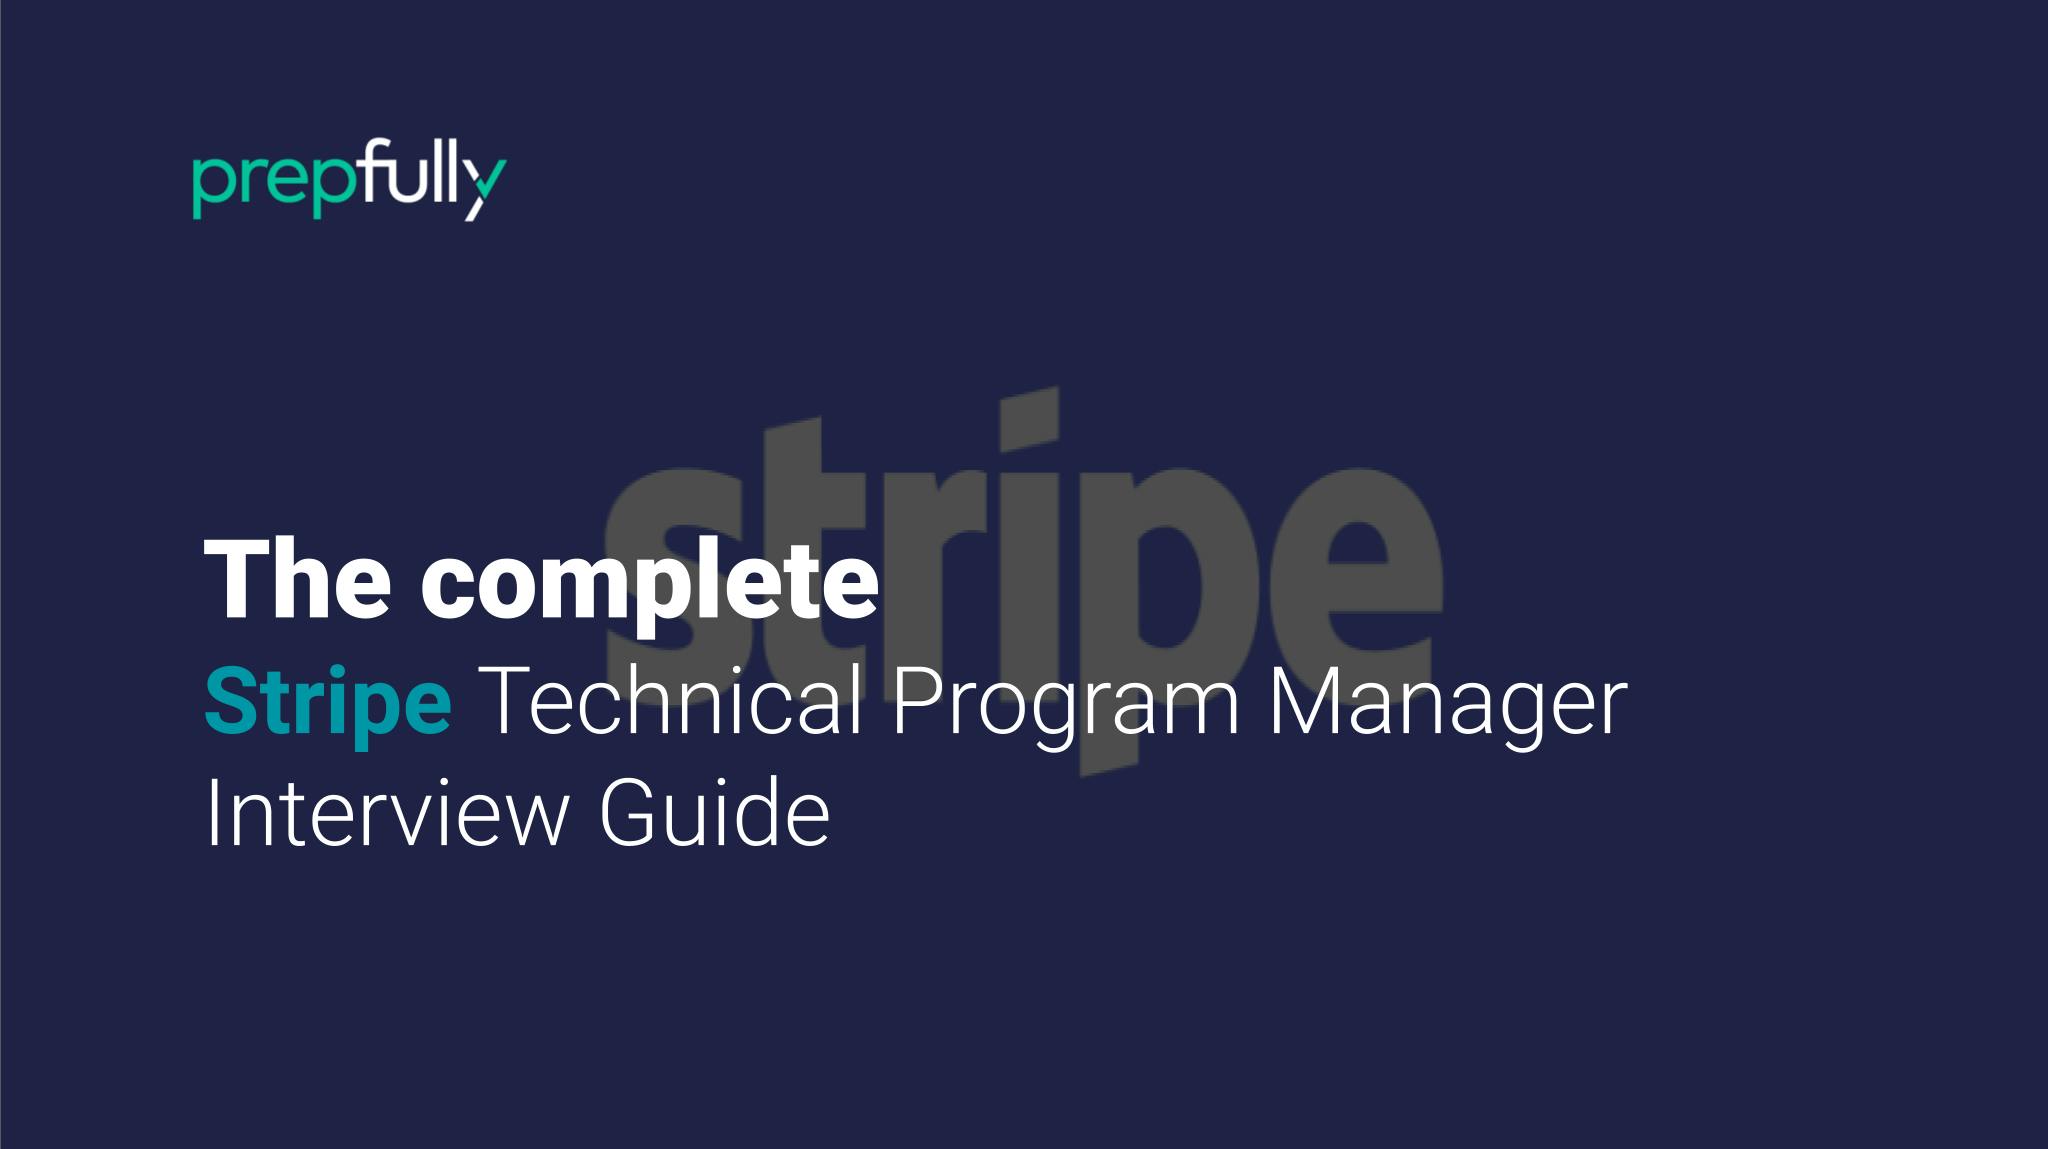 Interview guide for Stripe Technical Program Manager